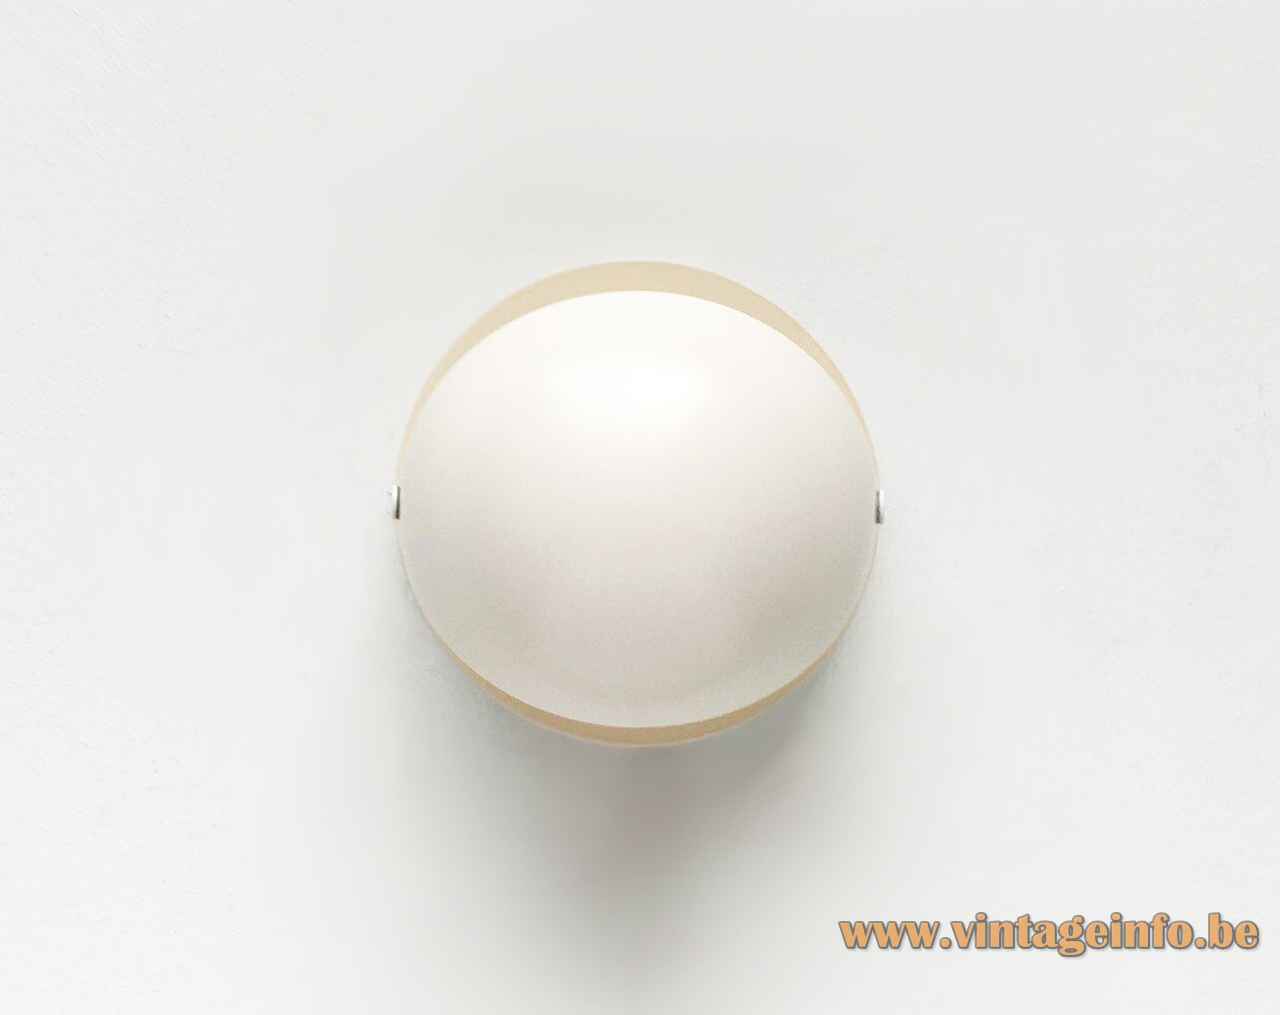 Cosack eclipse wall lamp white metal base adjustable half round lampshade 1960s 1970s Germany E27 socket